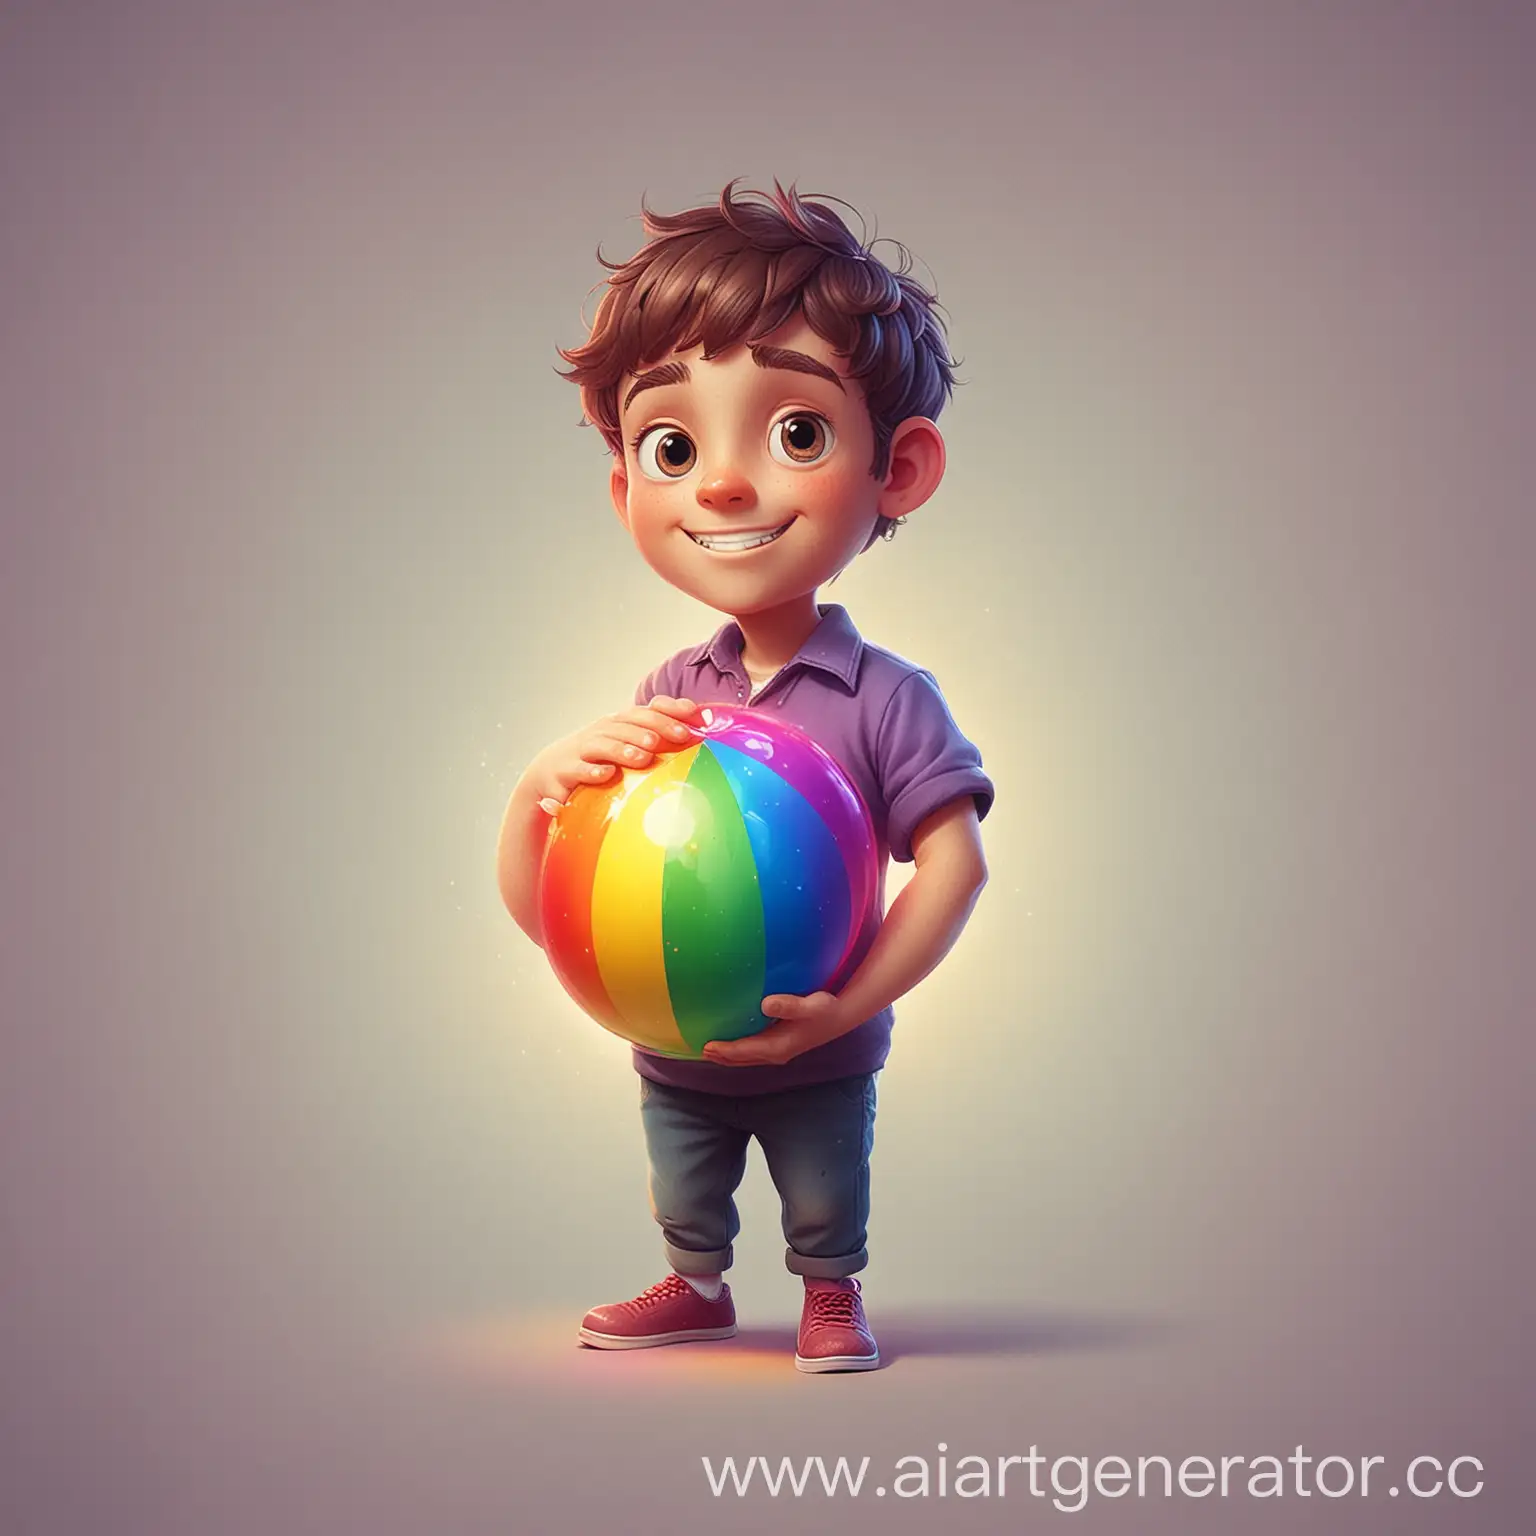 Kindness-Symbolized-Character-Holding-Bright-Multicolored-Ball